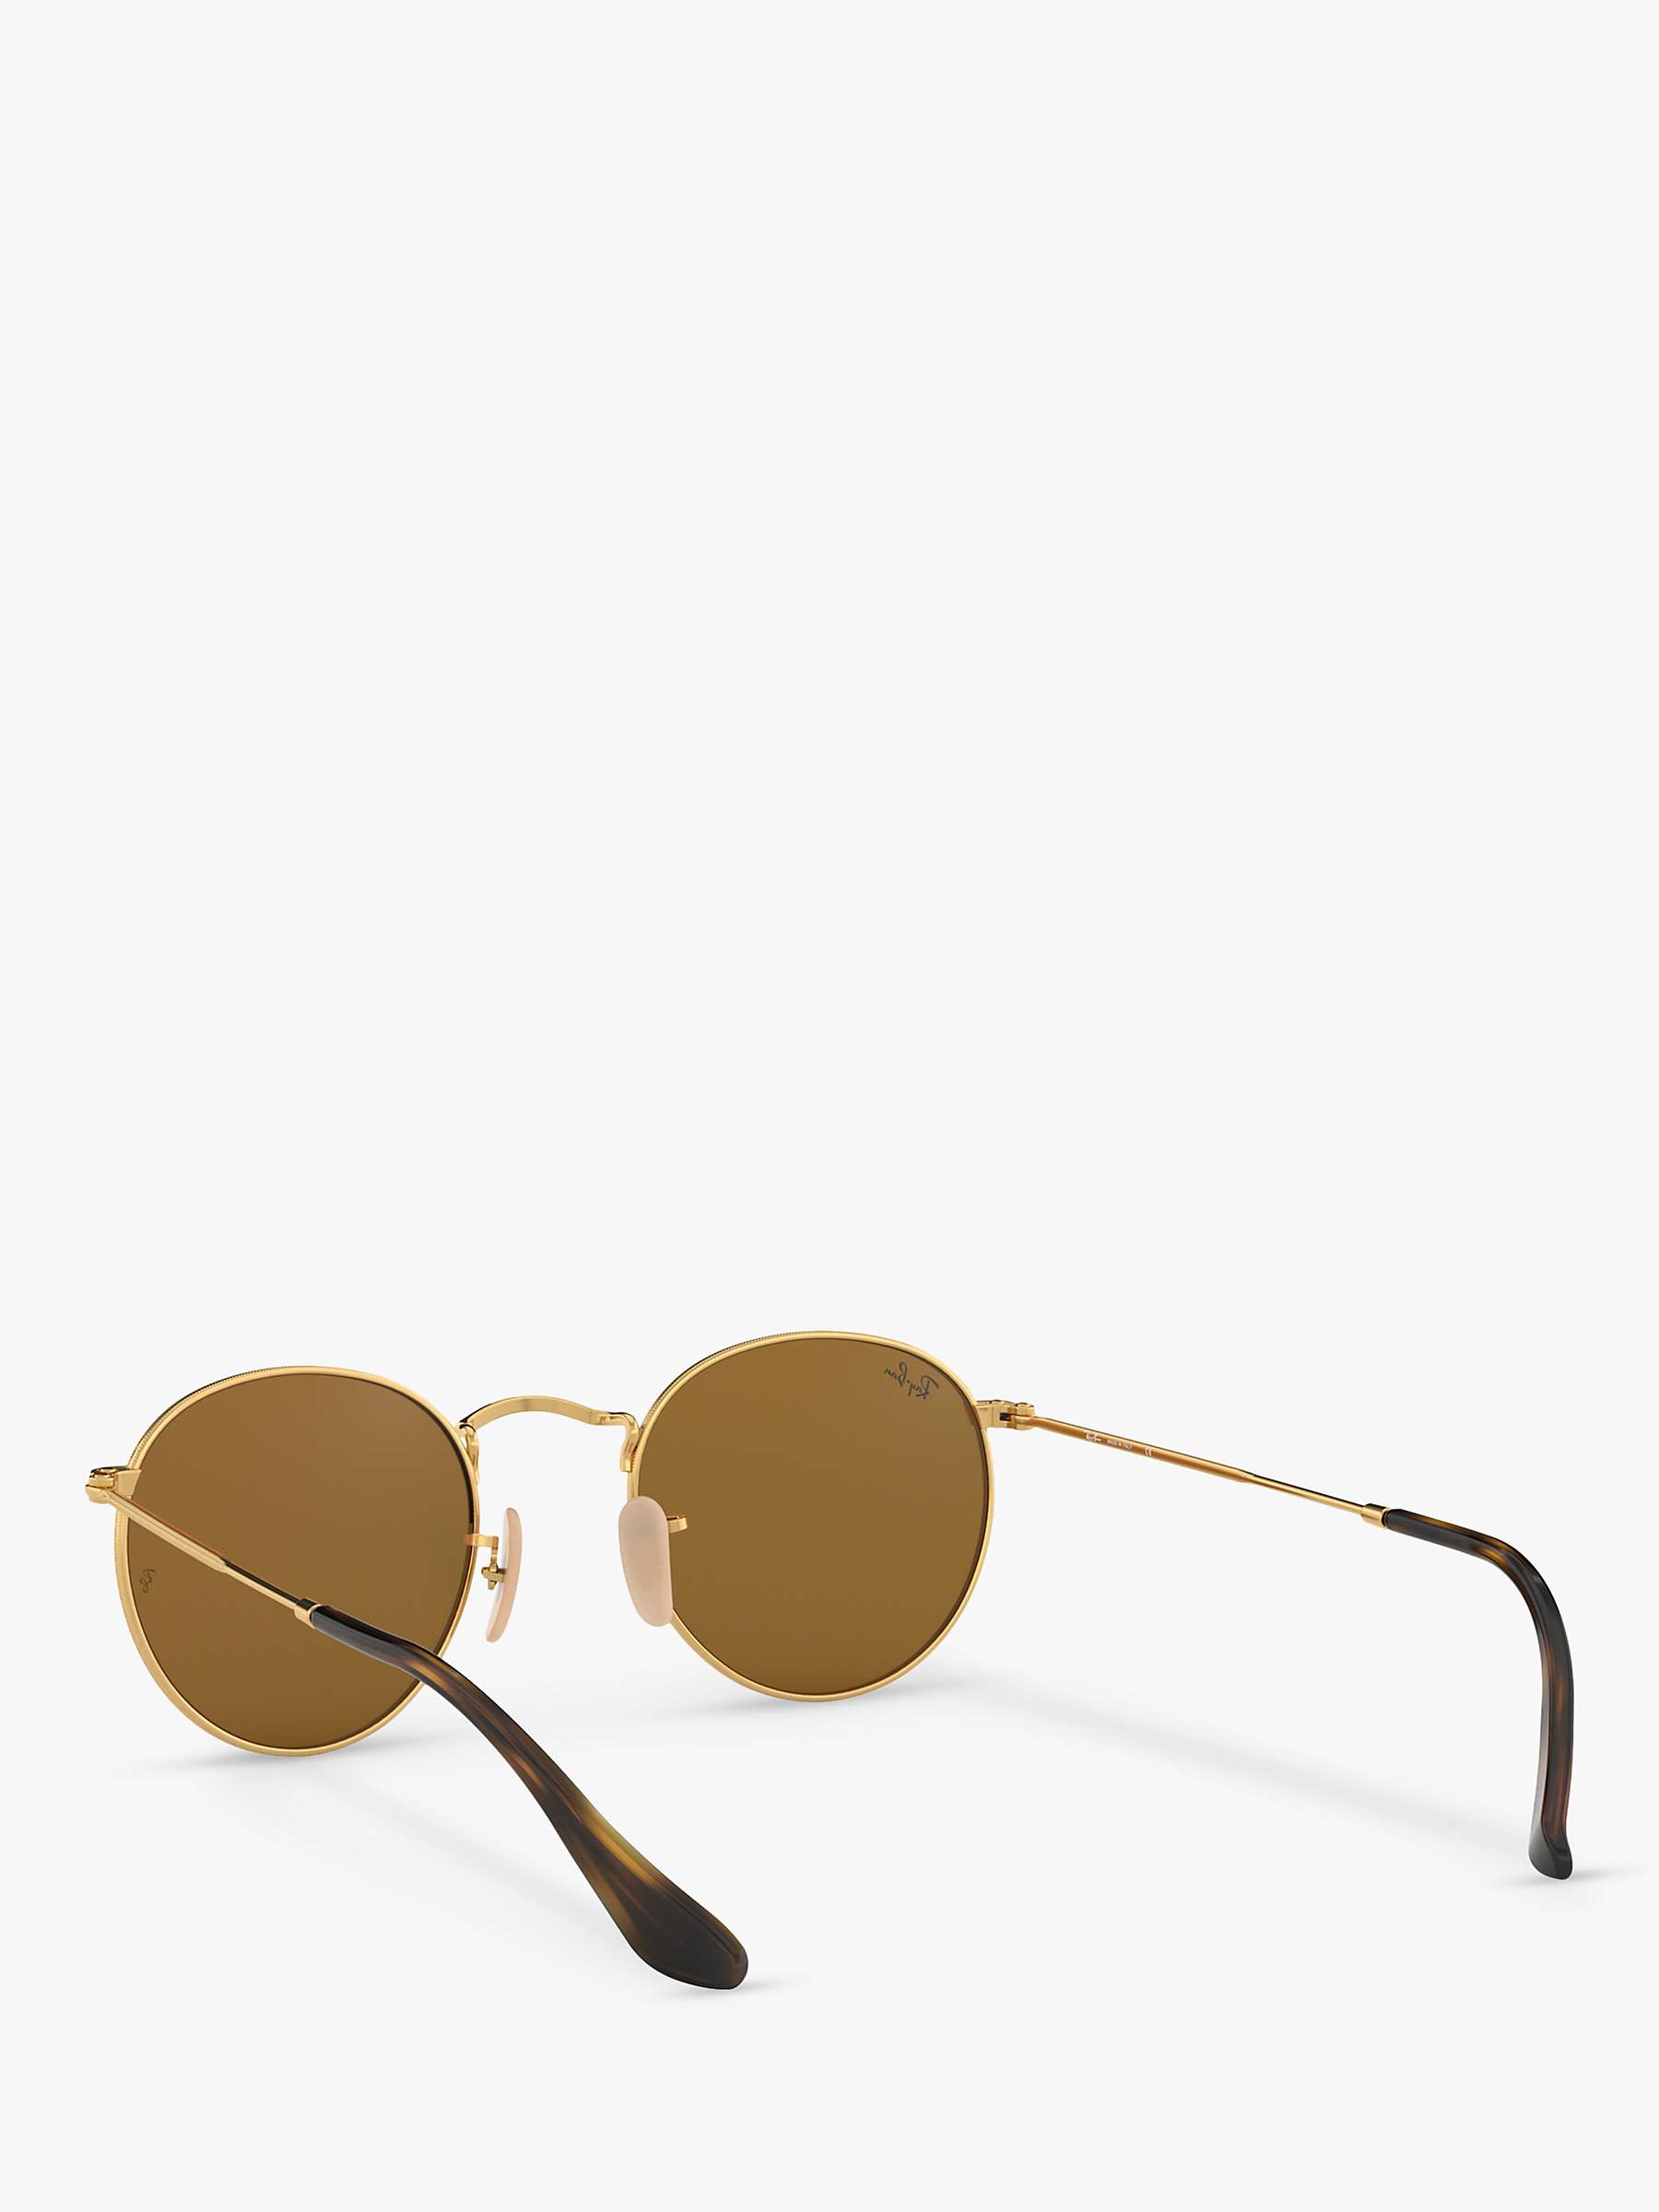 Buy Ray-Ban RB3447N Men's Round Flash Sunglasses, Shiny Gold/Mirror Pink Online at johnlewis.com